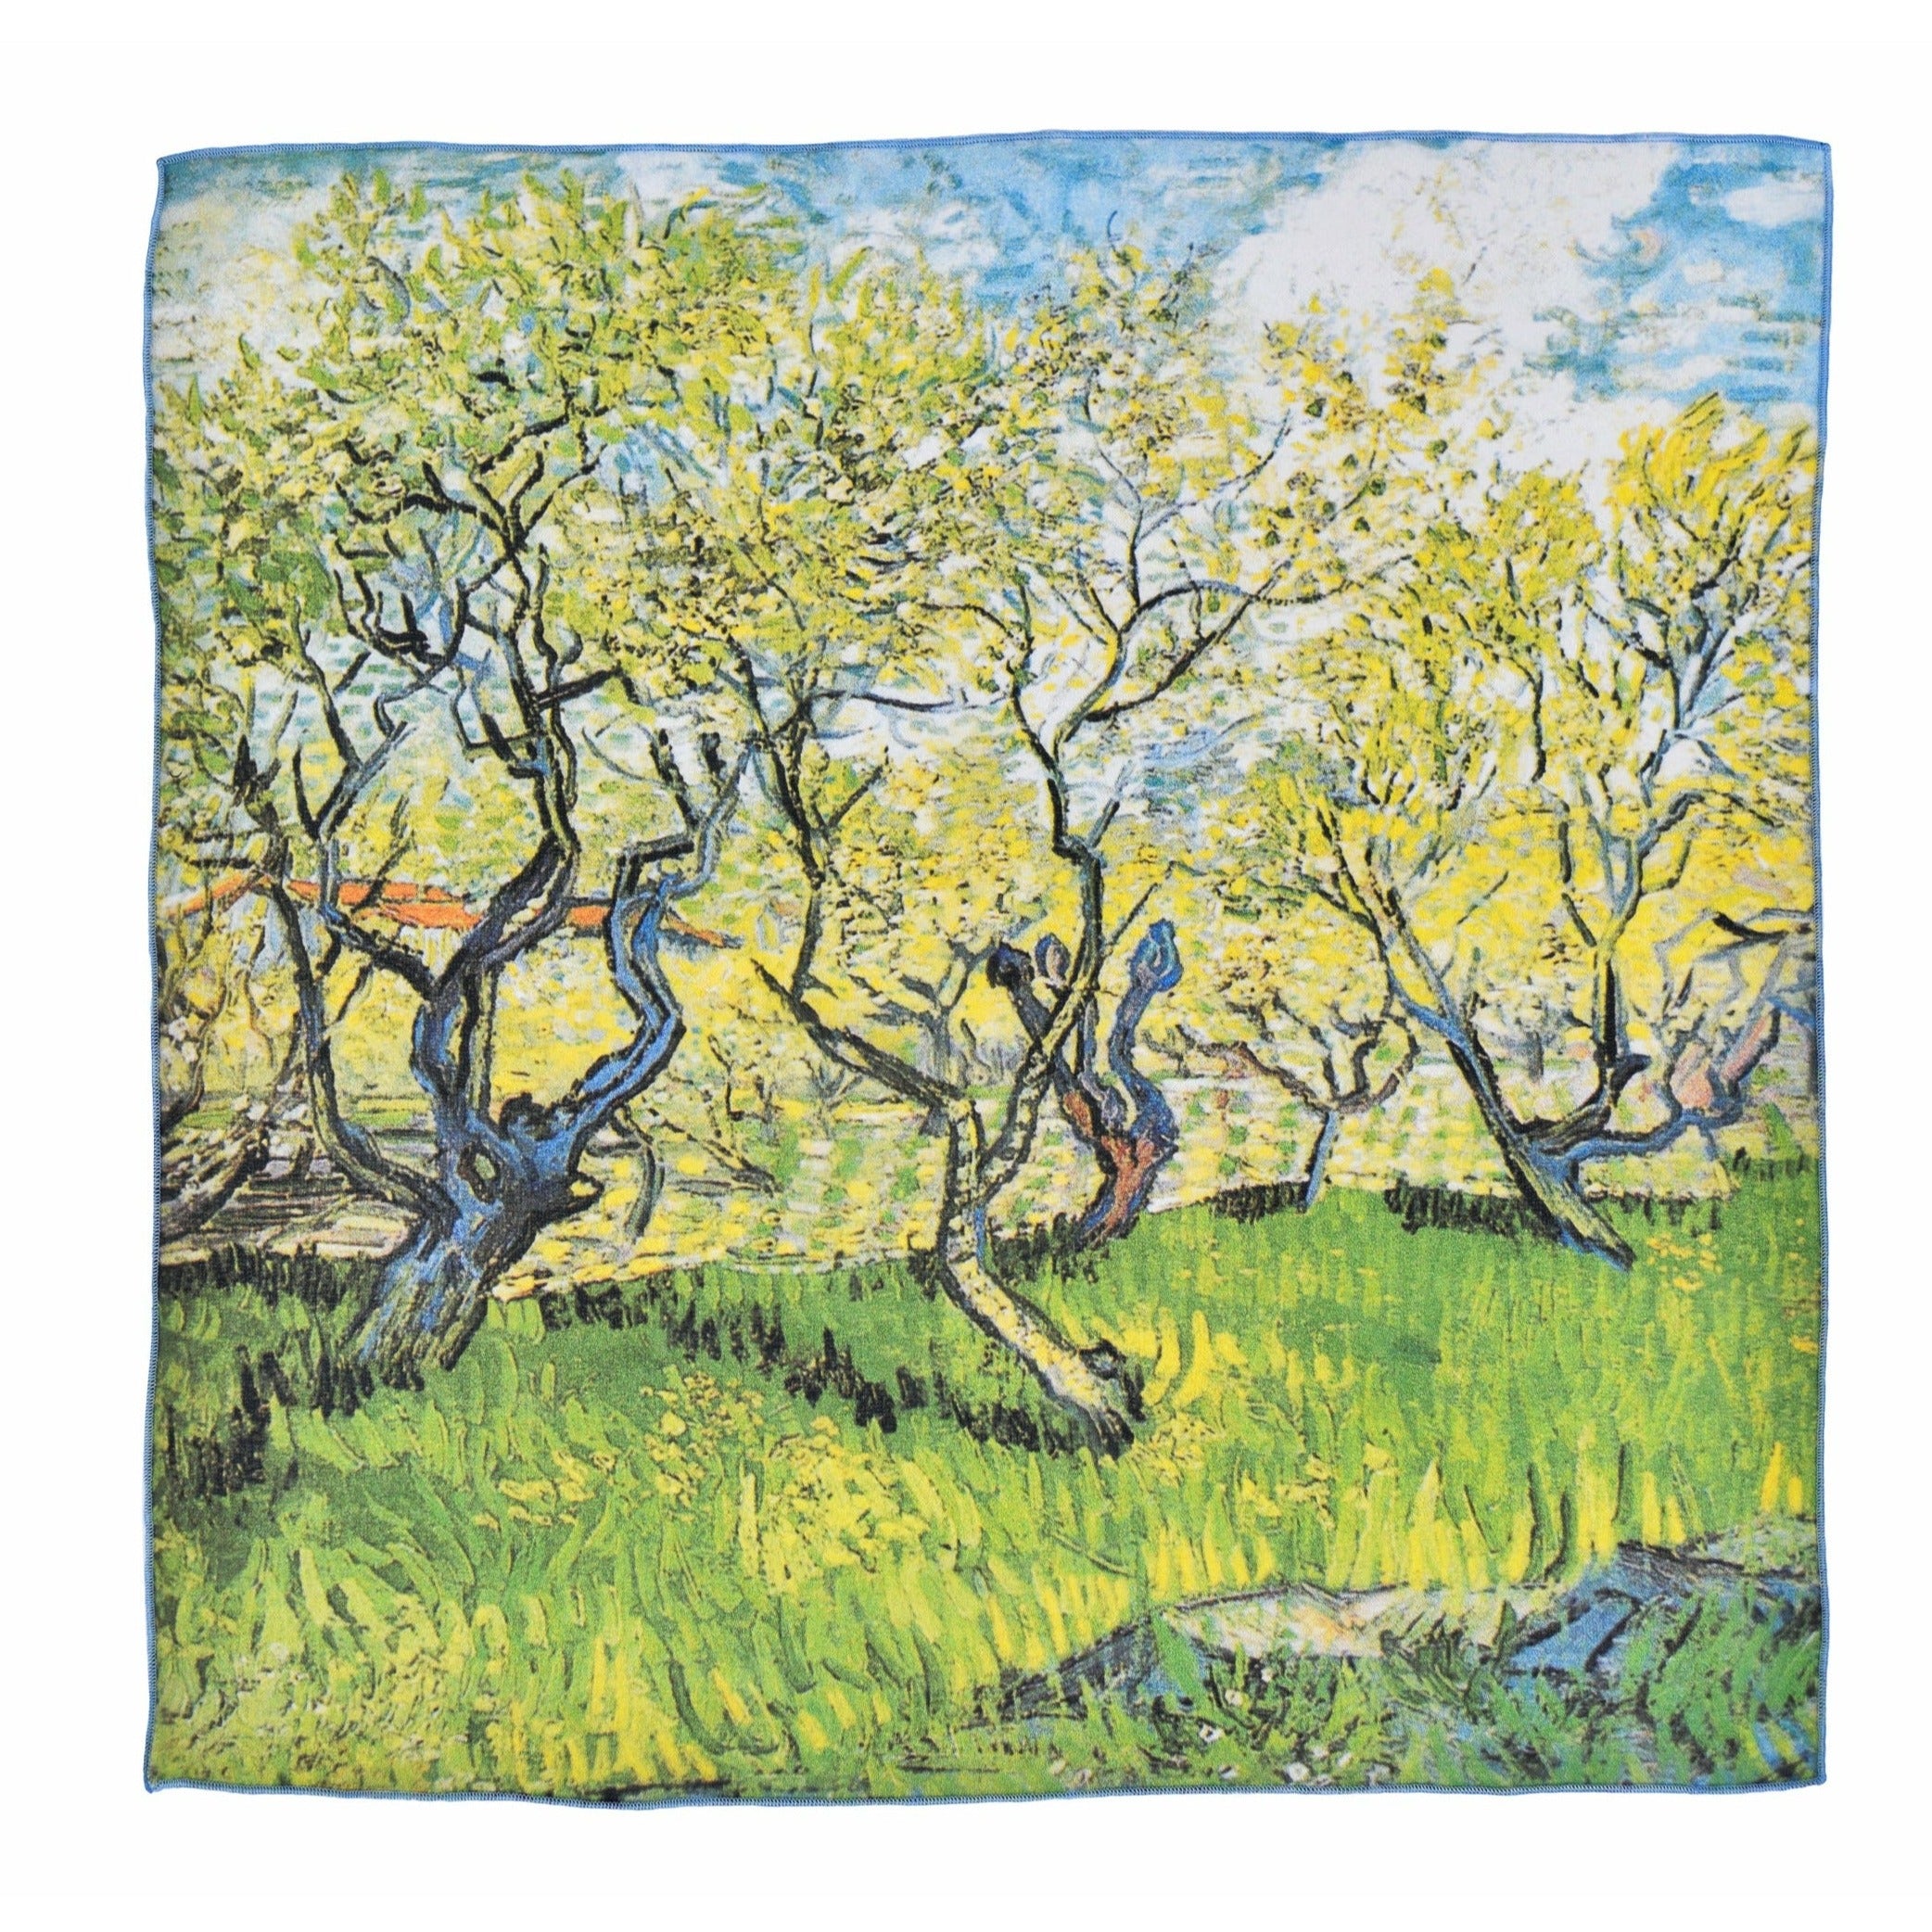 Scarf Vincent van Gogh "Orchard in Blossom"